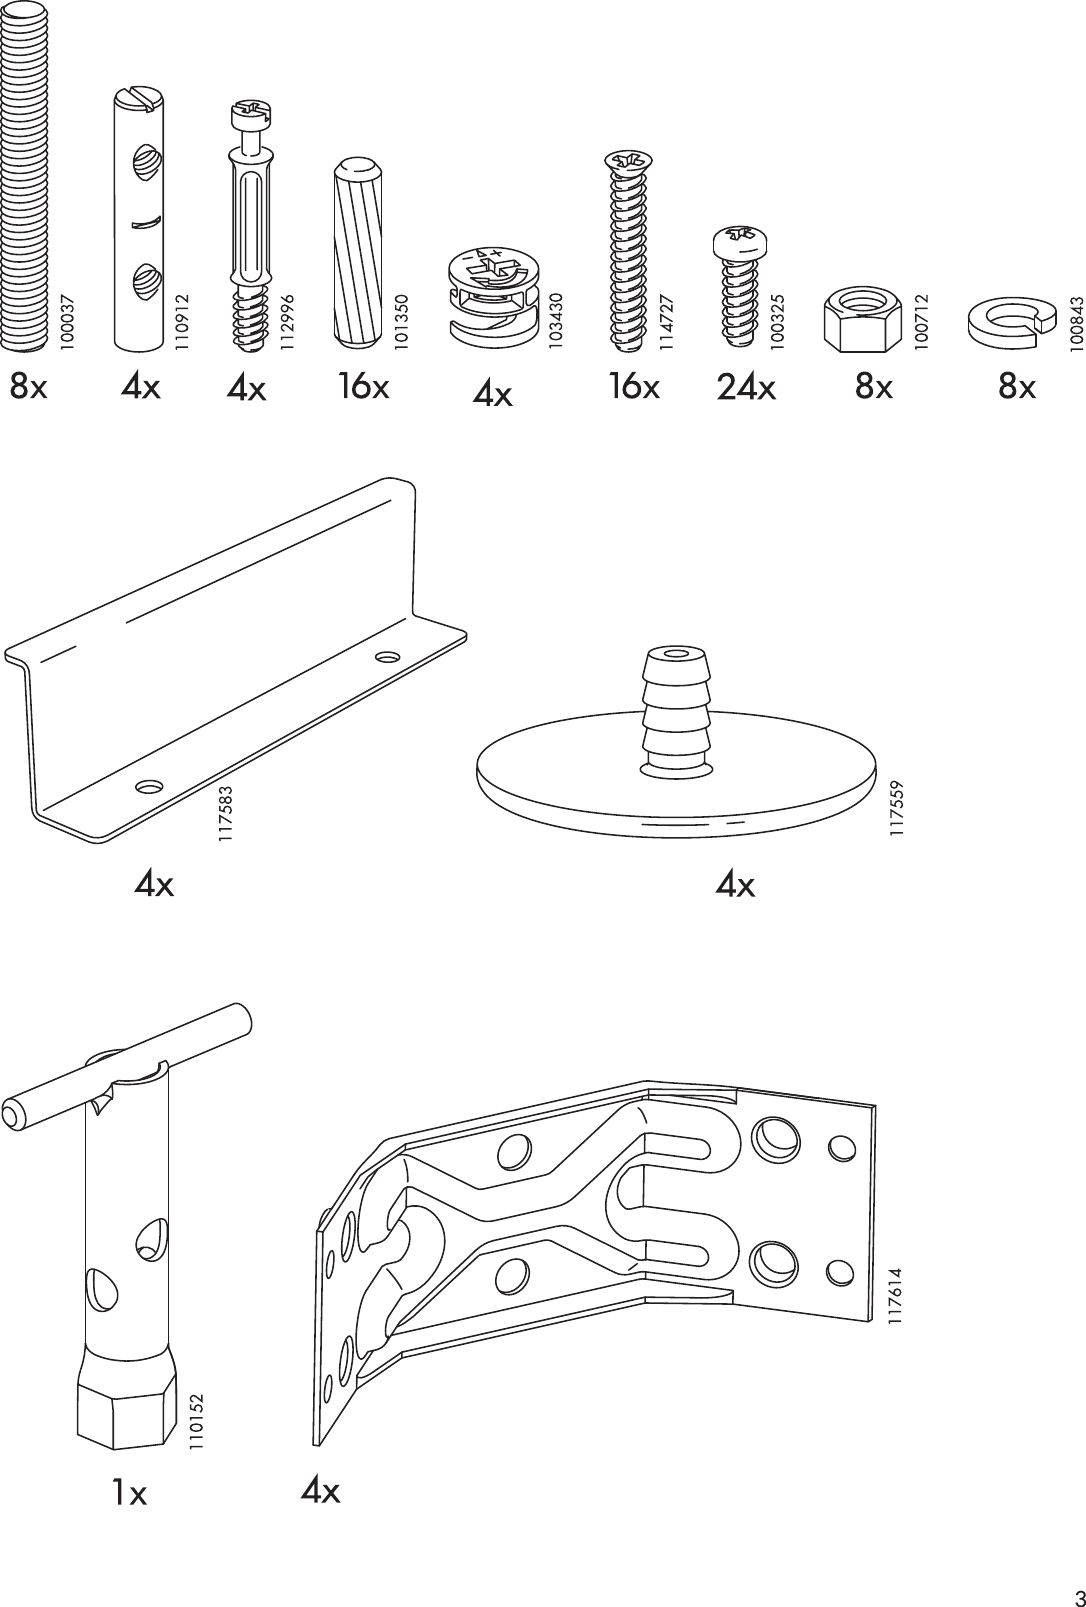 Page 3 of 12 - Ikea Ikea-Bjursta-Extendable-Dining-Table-94-114-133X43-Assembly-Instruction